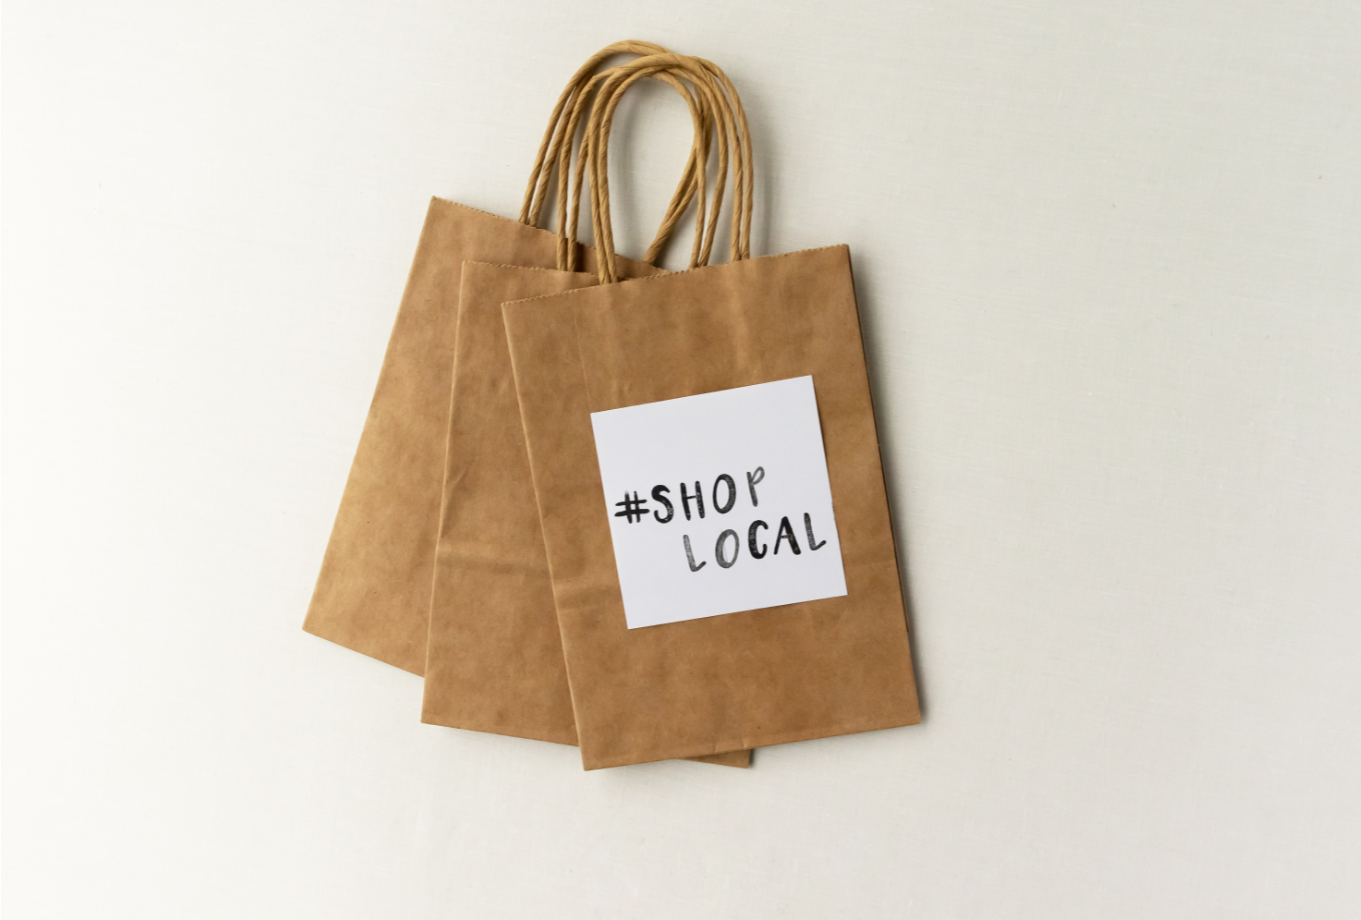 Support a Small Business: 2 Retailers That We Have a Personal Connection With